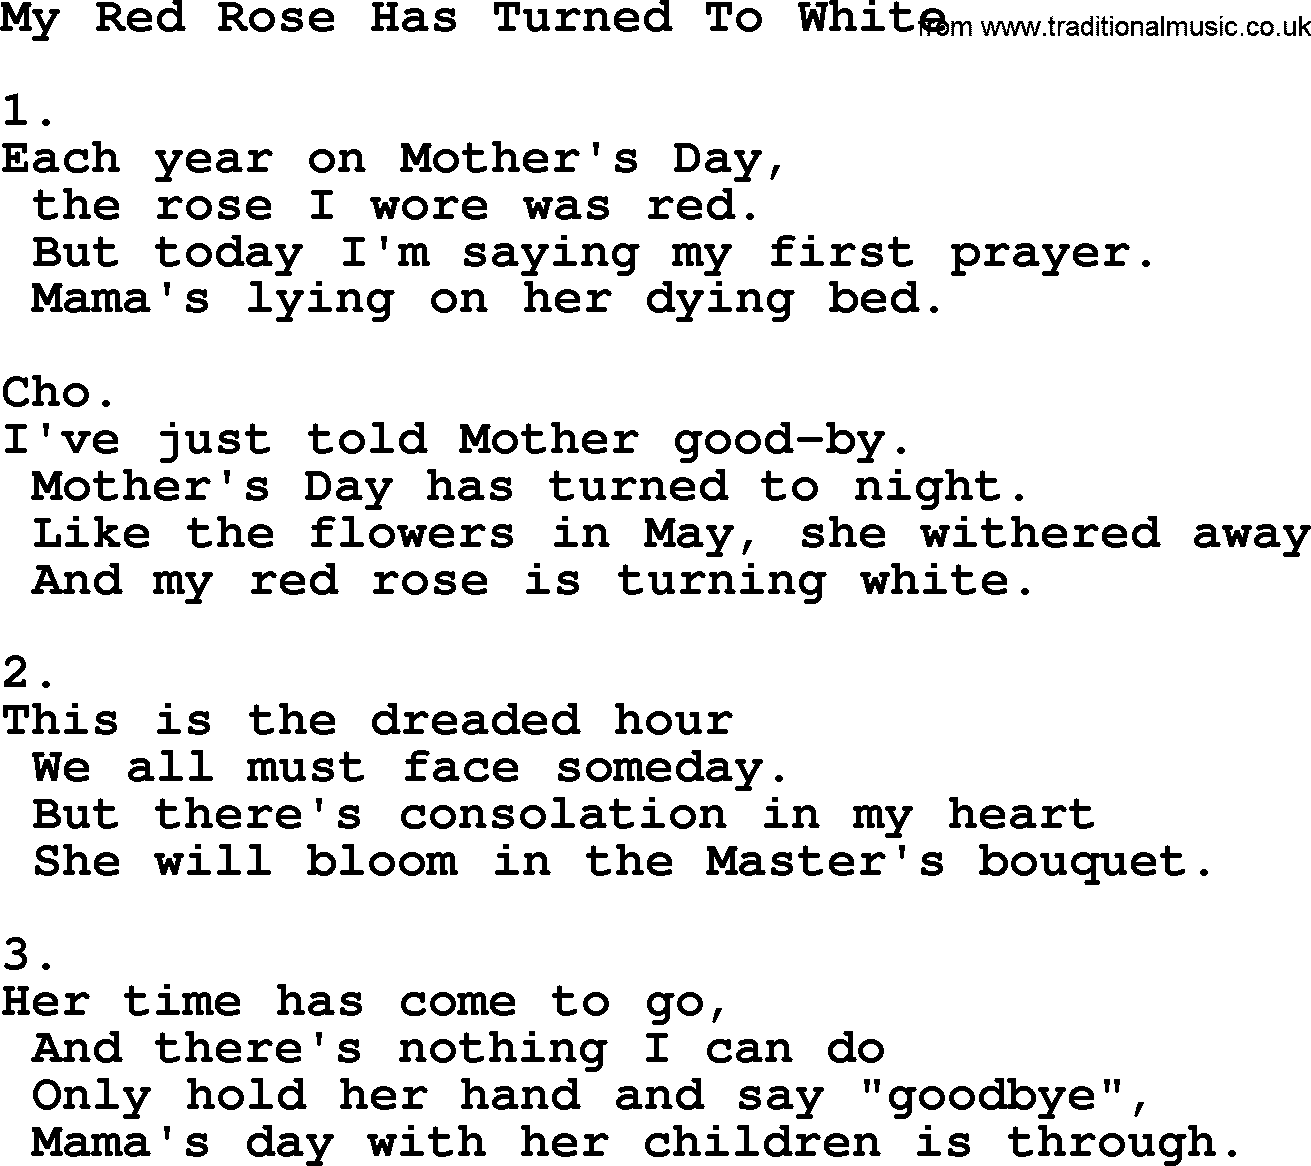 Apostolic & Pentecostal Hymns and Songs, Hymn: My Red Rose Has Turned To White lyrics and PDF